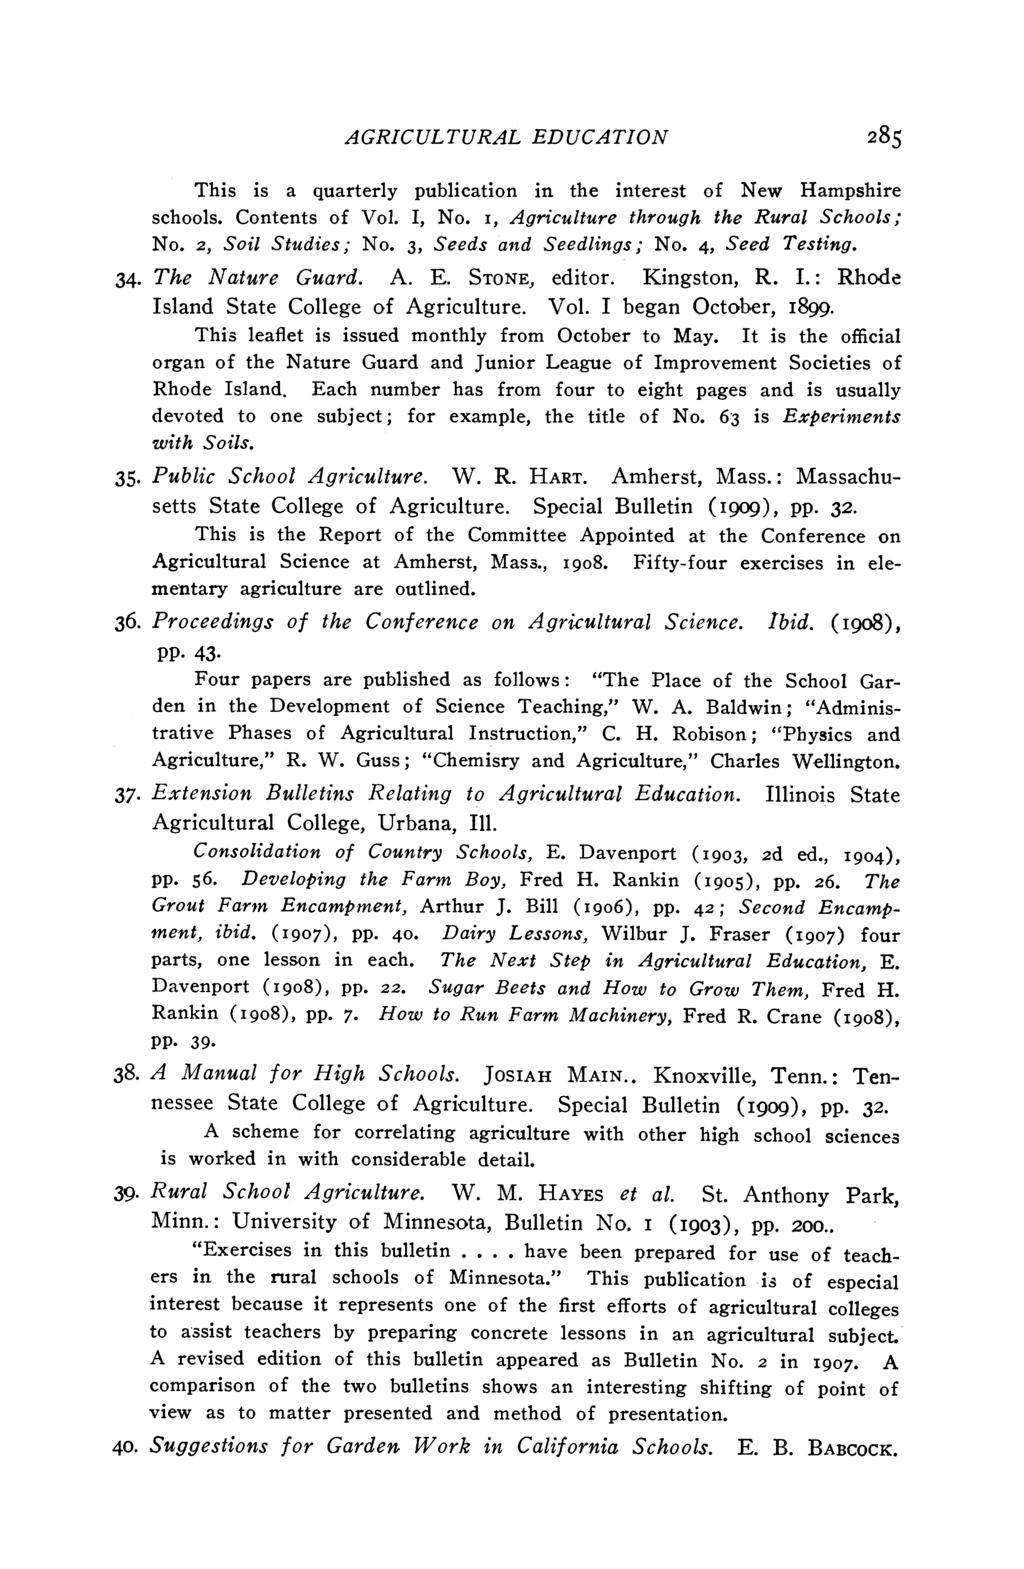 AGRICULTURAL EDUCATION 285 This is a quarterly publication in the interest of New Hampshire schools. Contents of Vol. I, No. i, Agriculture through the Rural Schools; No. 2, Soil Studies; No.